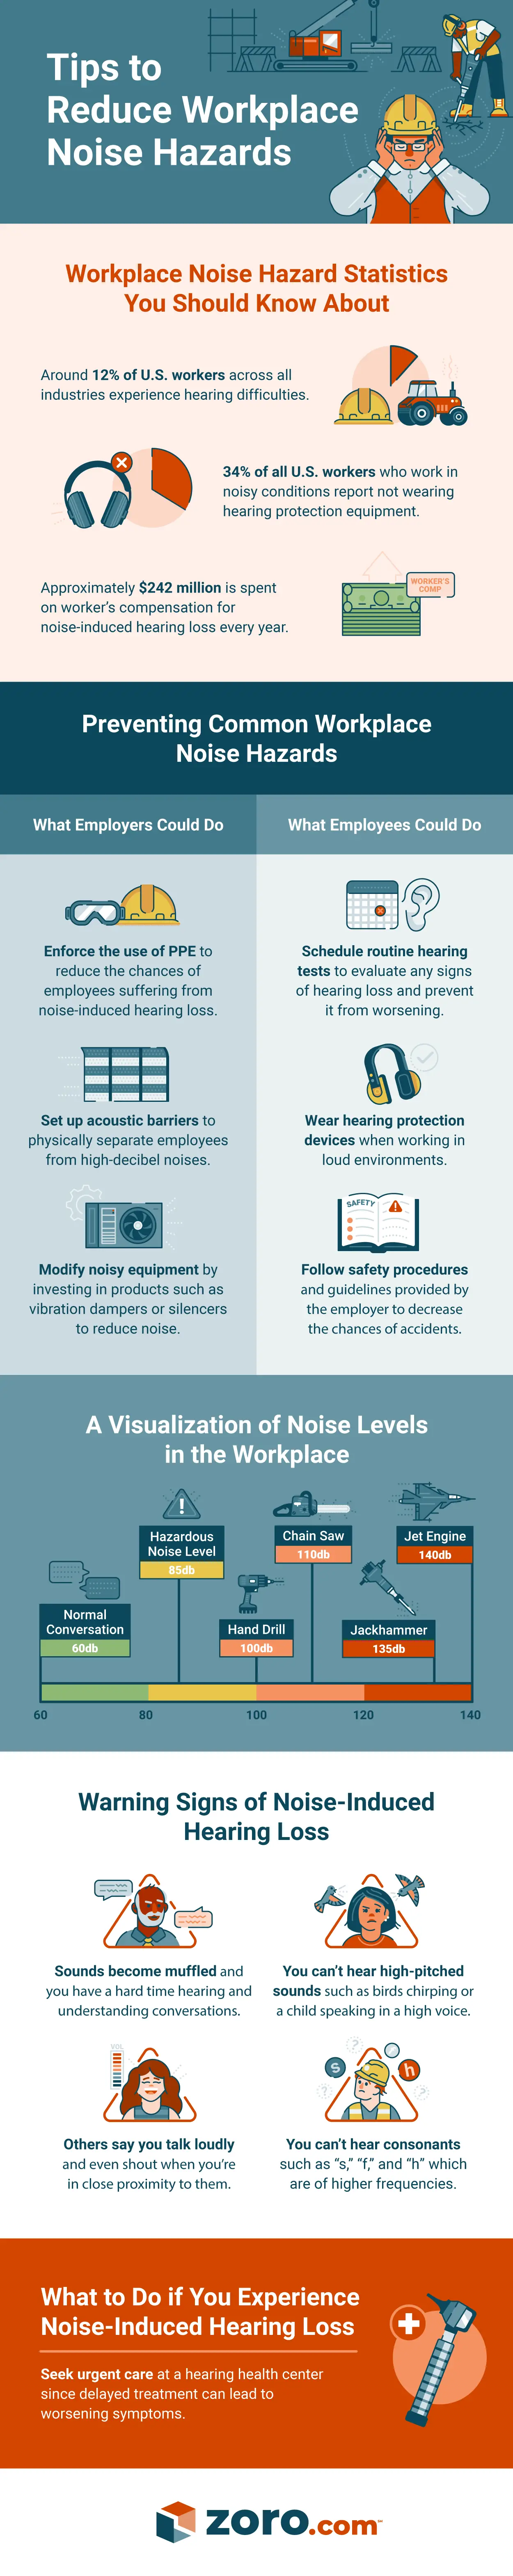 tips-to-reduce-workplace-noise-hazards.png